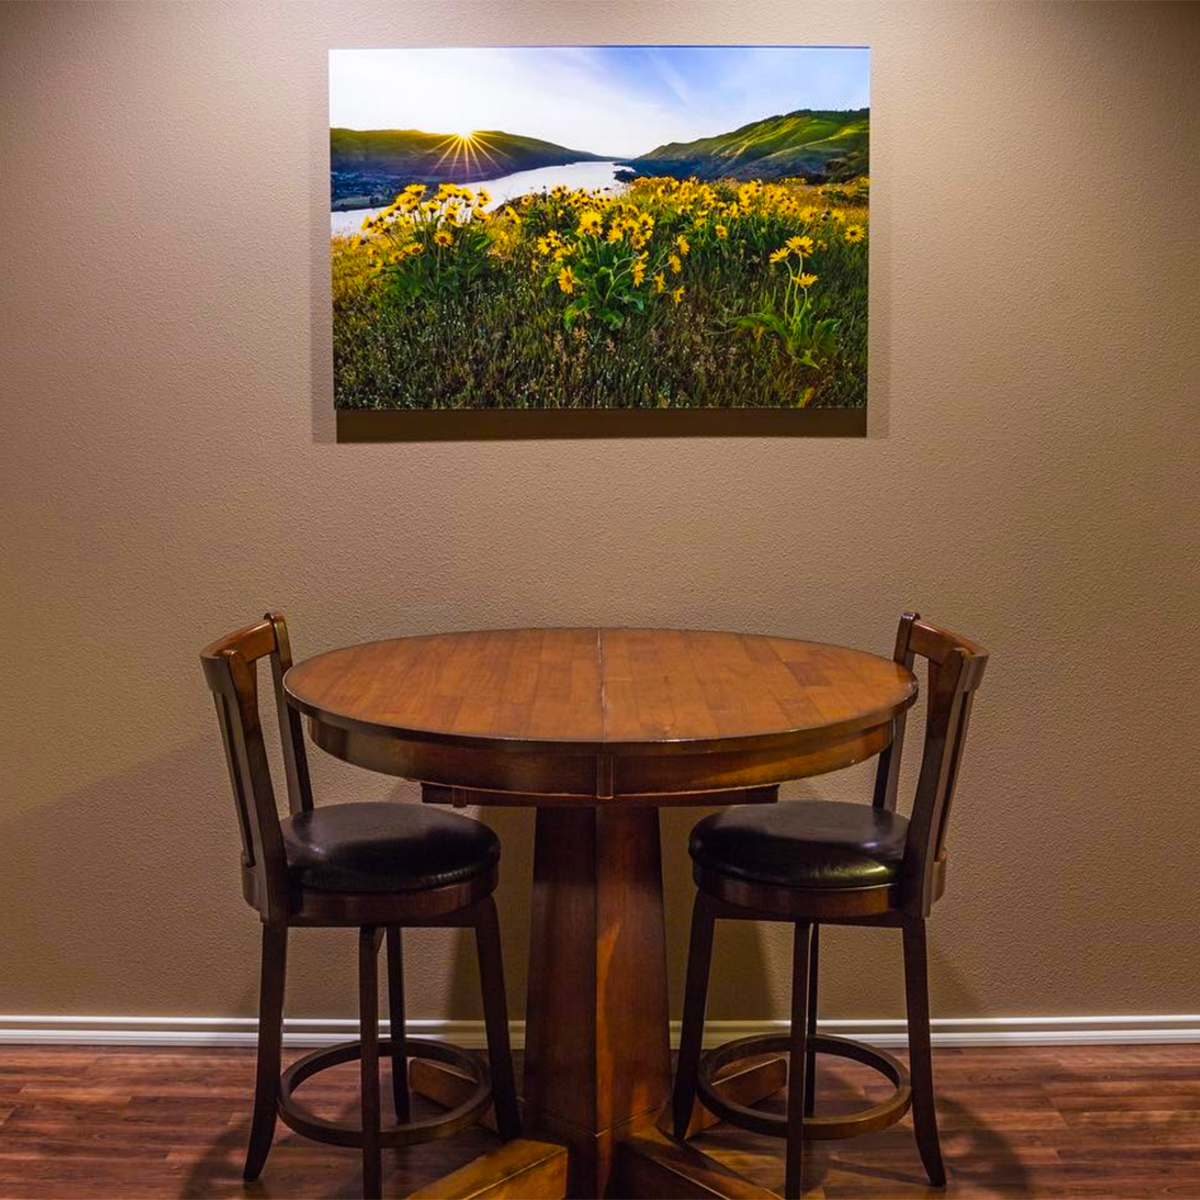 Acrylic Face Mount Print in Dining Room - Face Mounting Photos to Acyrlic